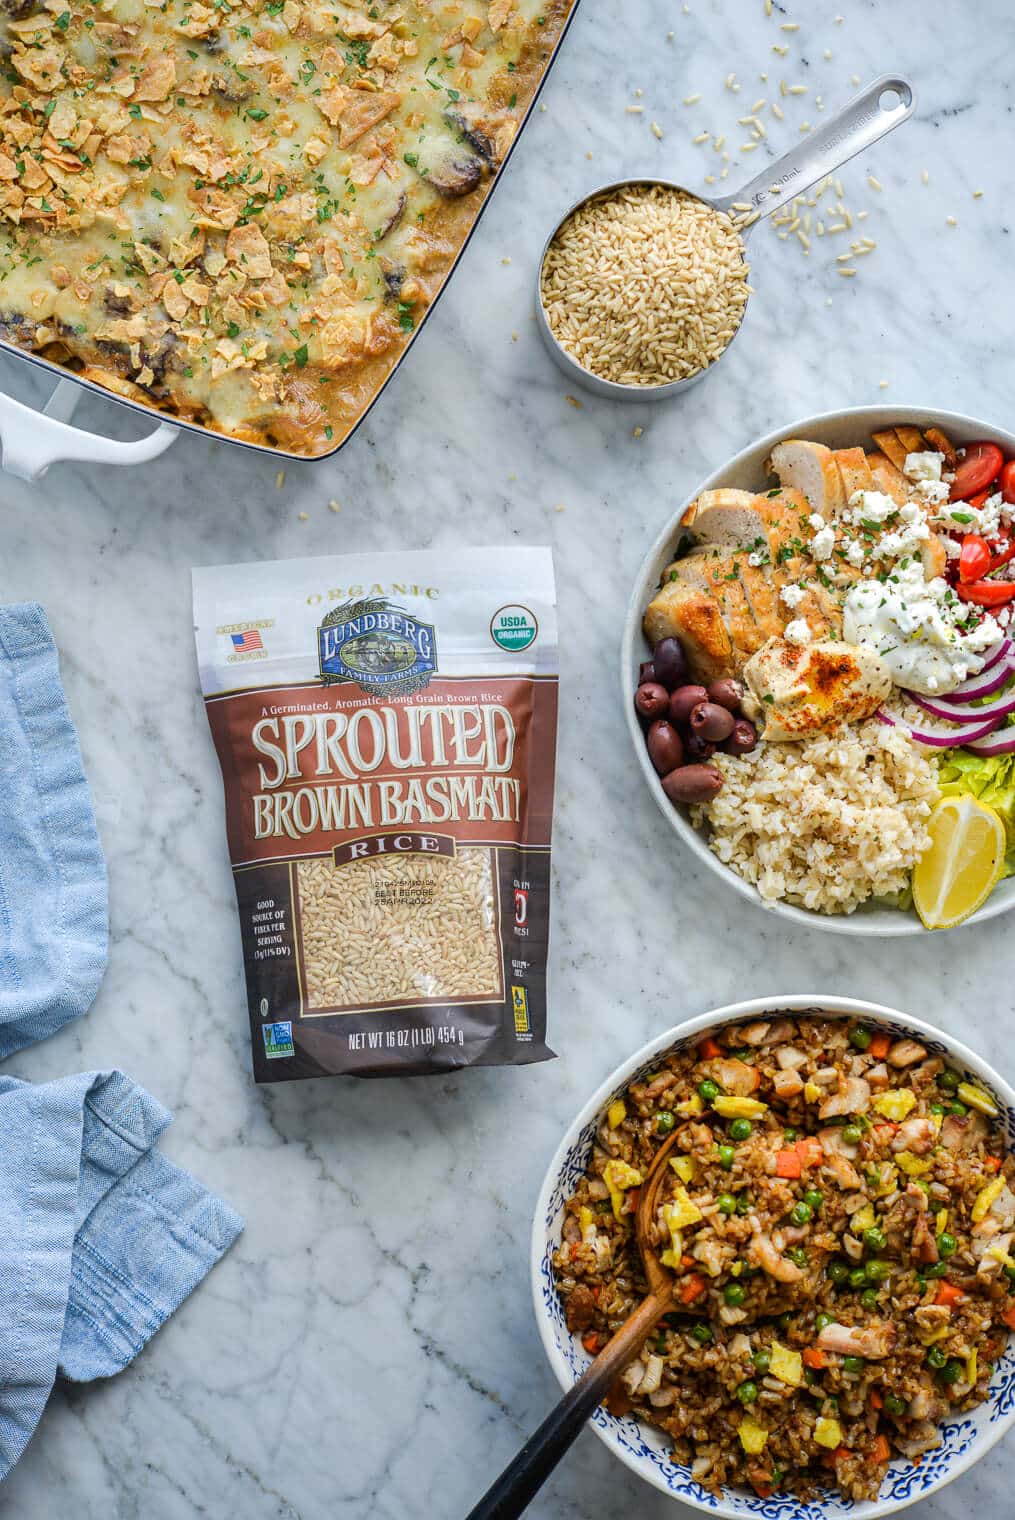 three chicken dishes (creamy chicken rice casserole, Greek power bowls, and chicken fried rice) surrounding a bag of Lundberg's sprouted brown basmati rice